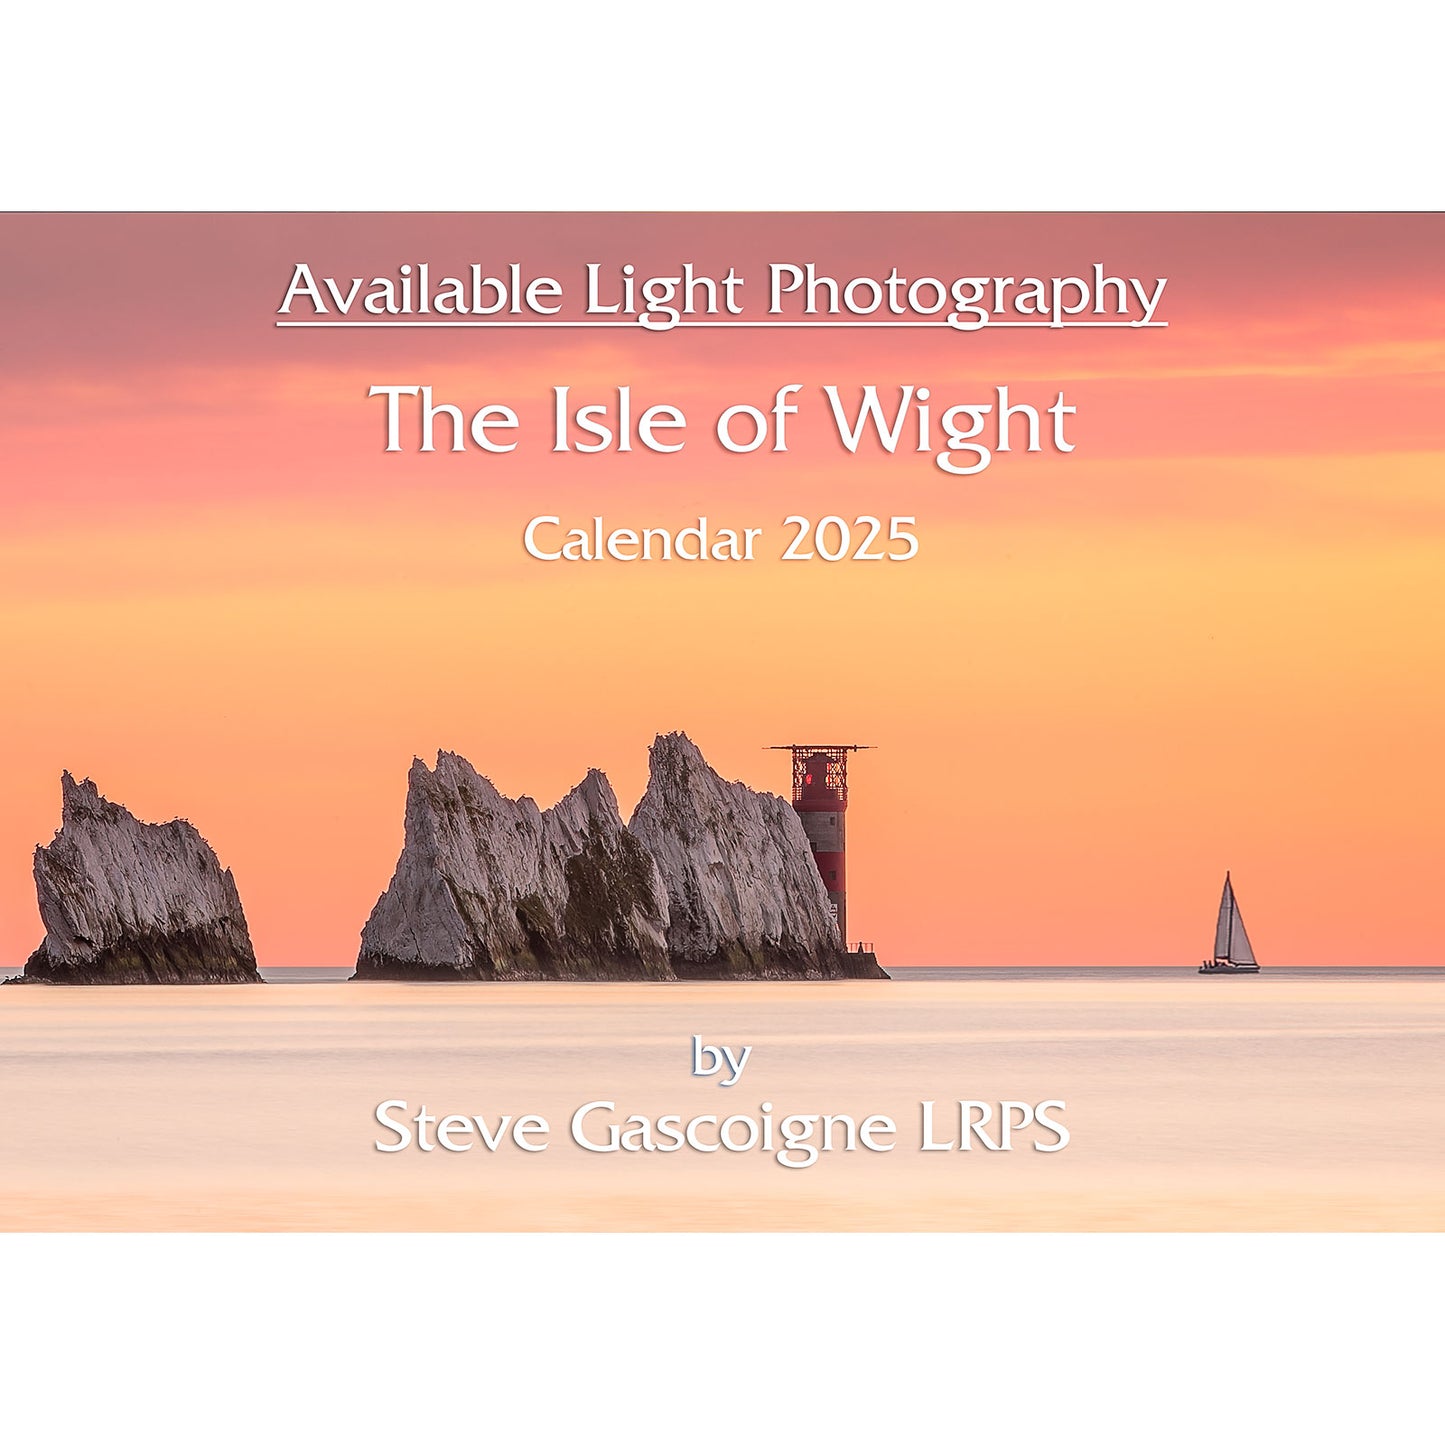 Cover of the "2025 Isle of Wight calendar" by Available Light Photography, featuring a photograph of coastal rock formations and a lighthouse at sunset, with a sailboat in the distance.